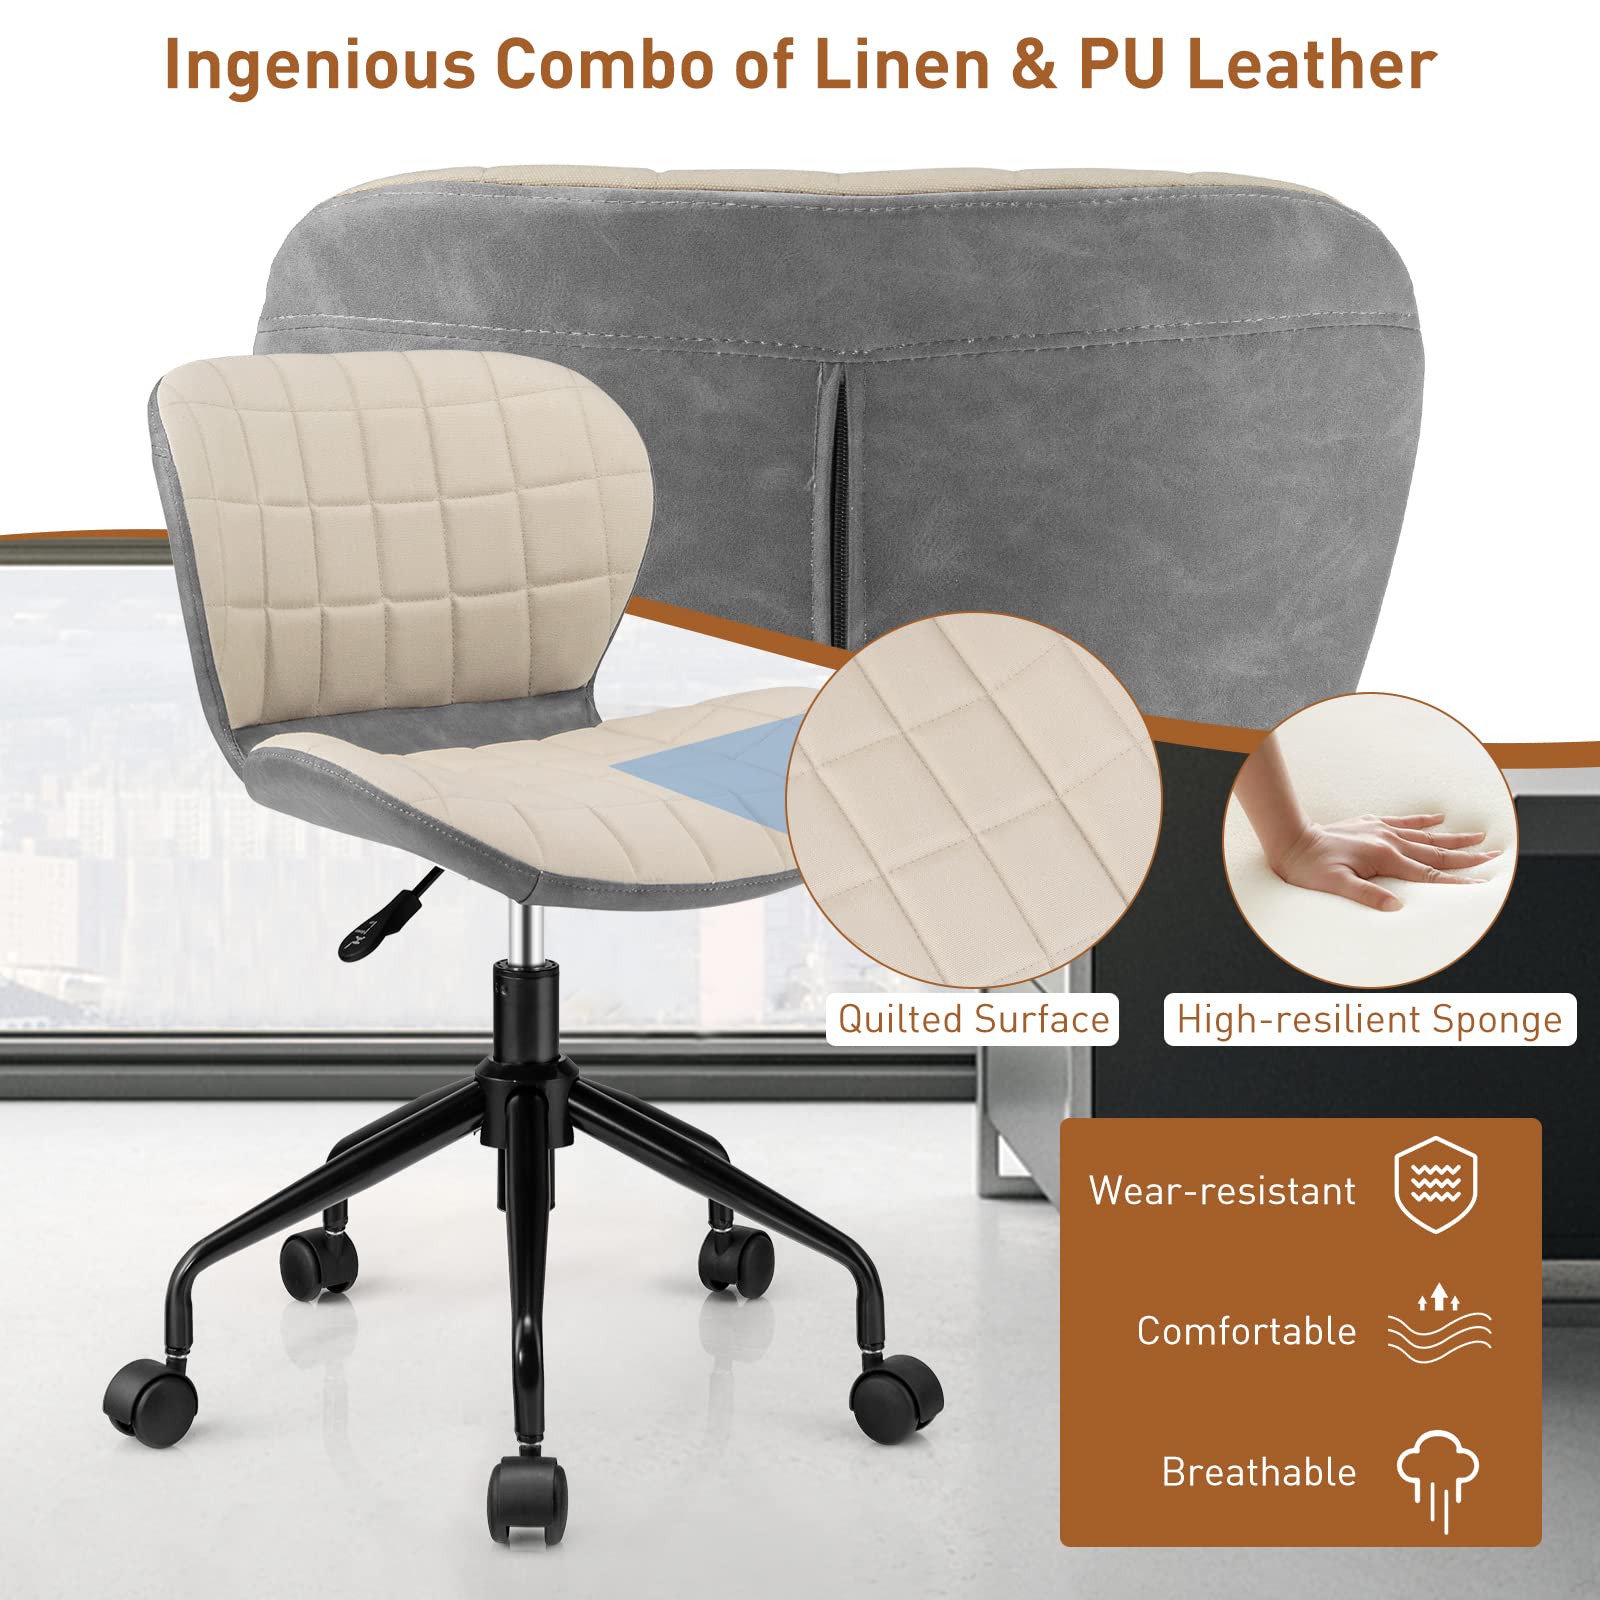 Giantex Ergonomic Home Office Desk Chair, Mid-Century Office Chair w/PU Leather & Fabric, Upholstery Computer Chair